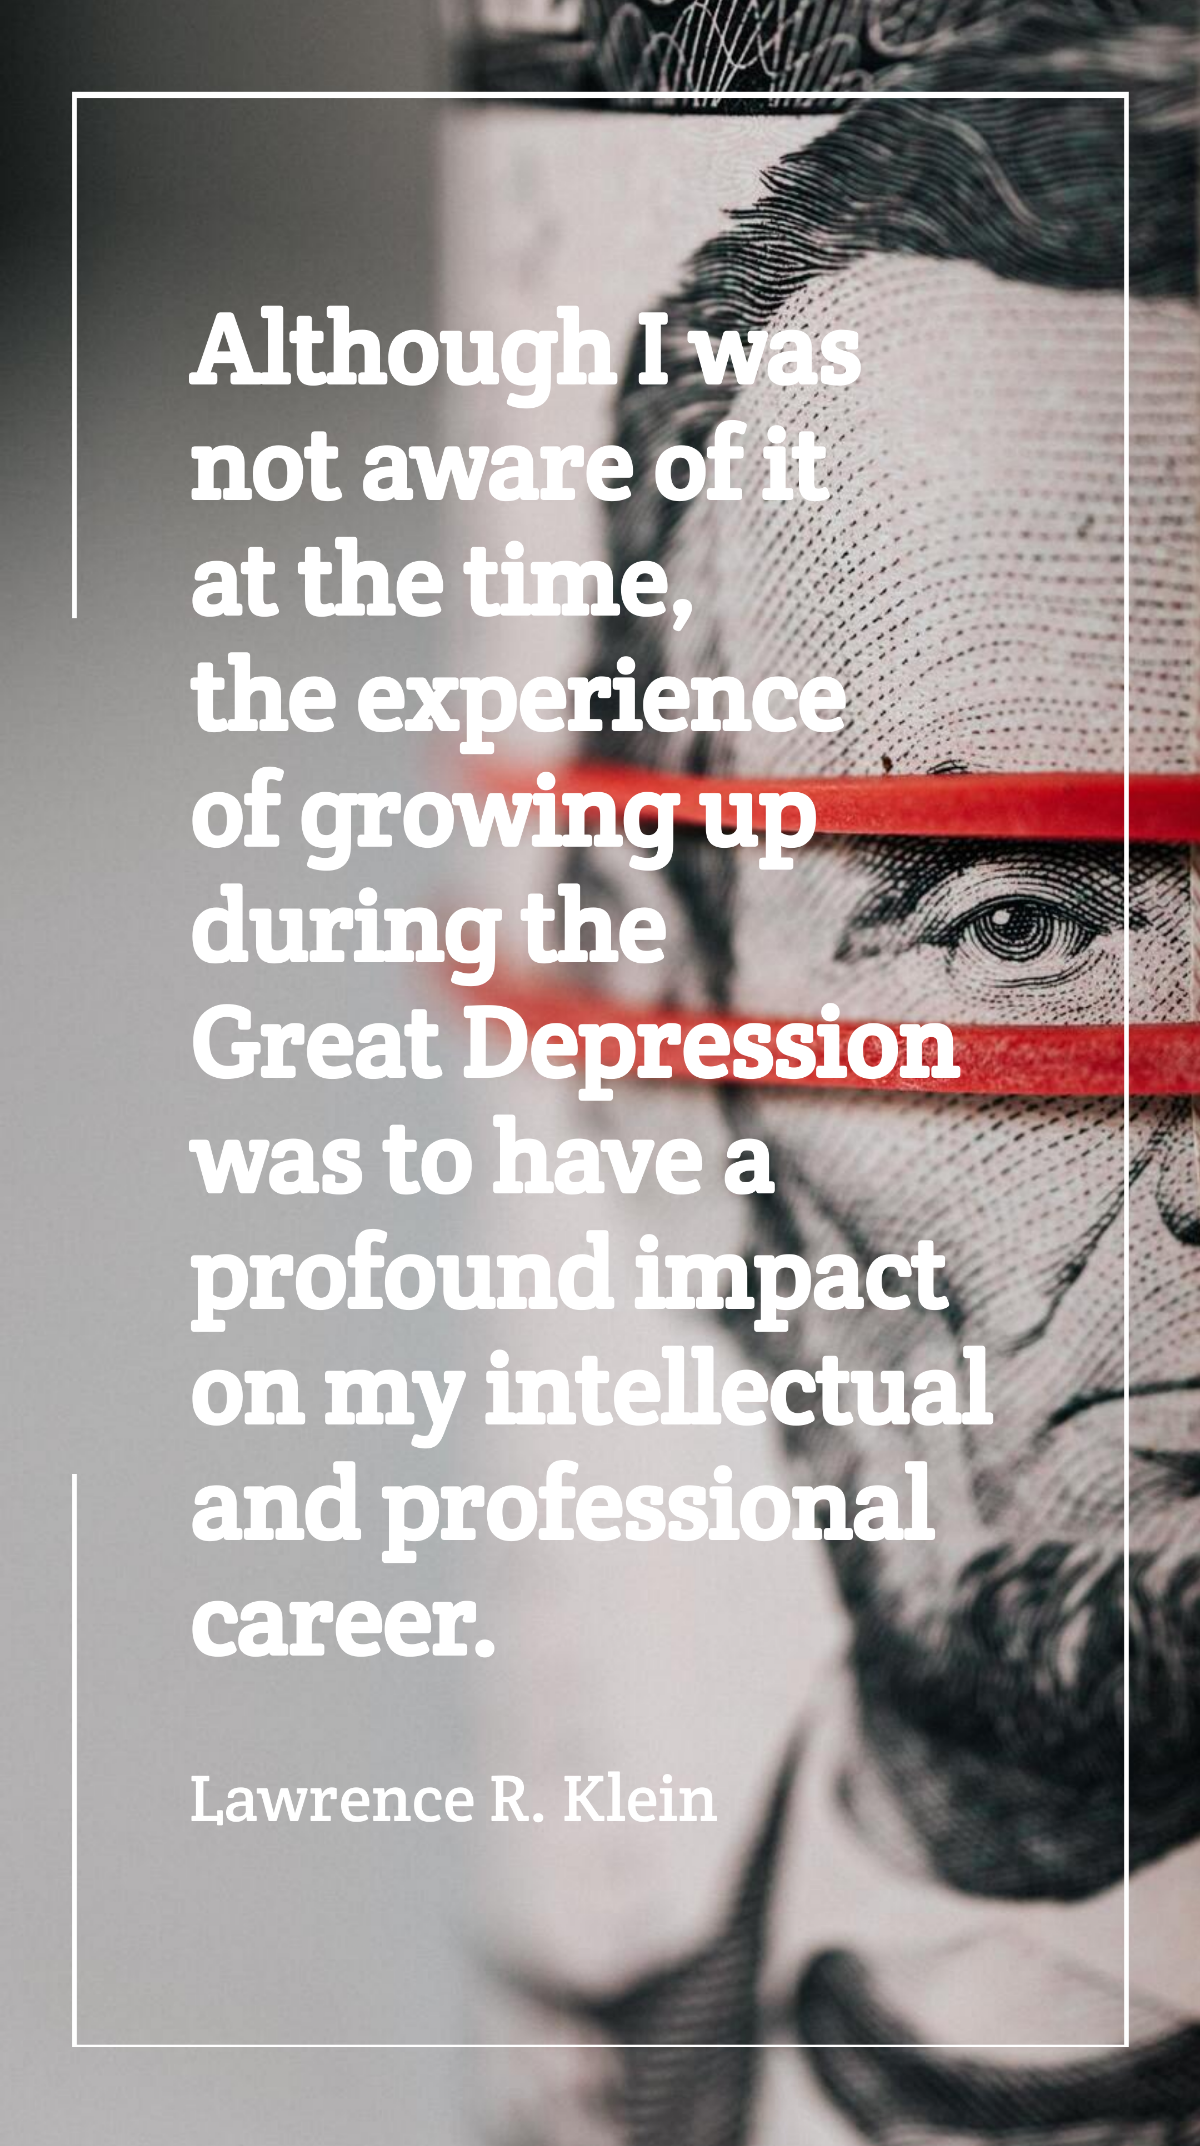 Lawrence R. Klein - Although I was not aware of it at the time, the experience of growing up during the Great Depression was to have a profound impact on my intellectual and professional career. Templ